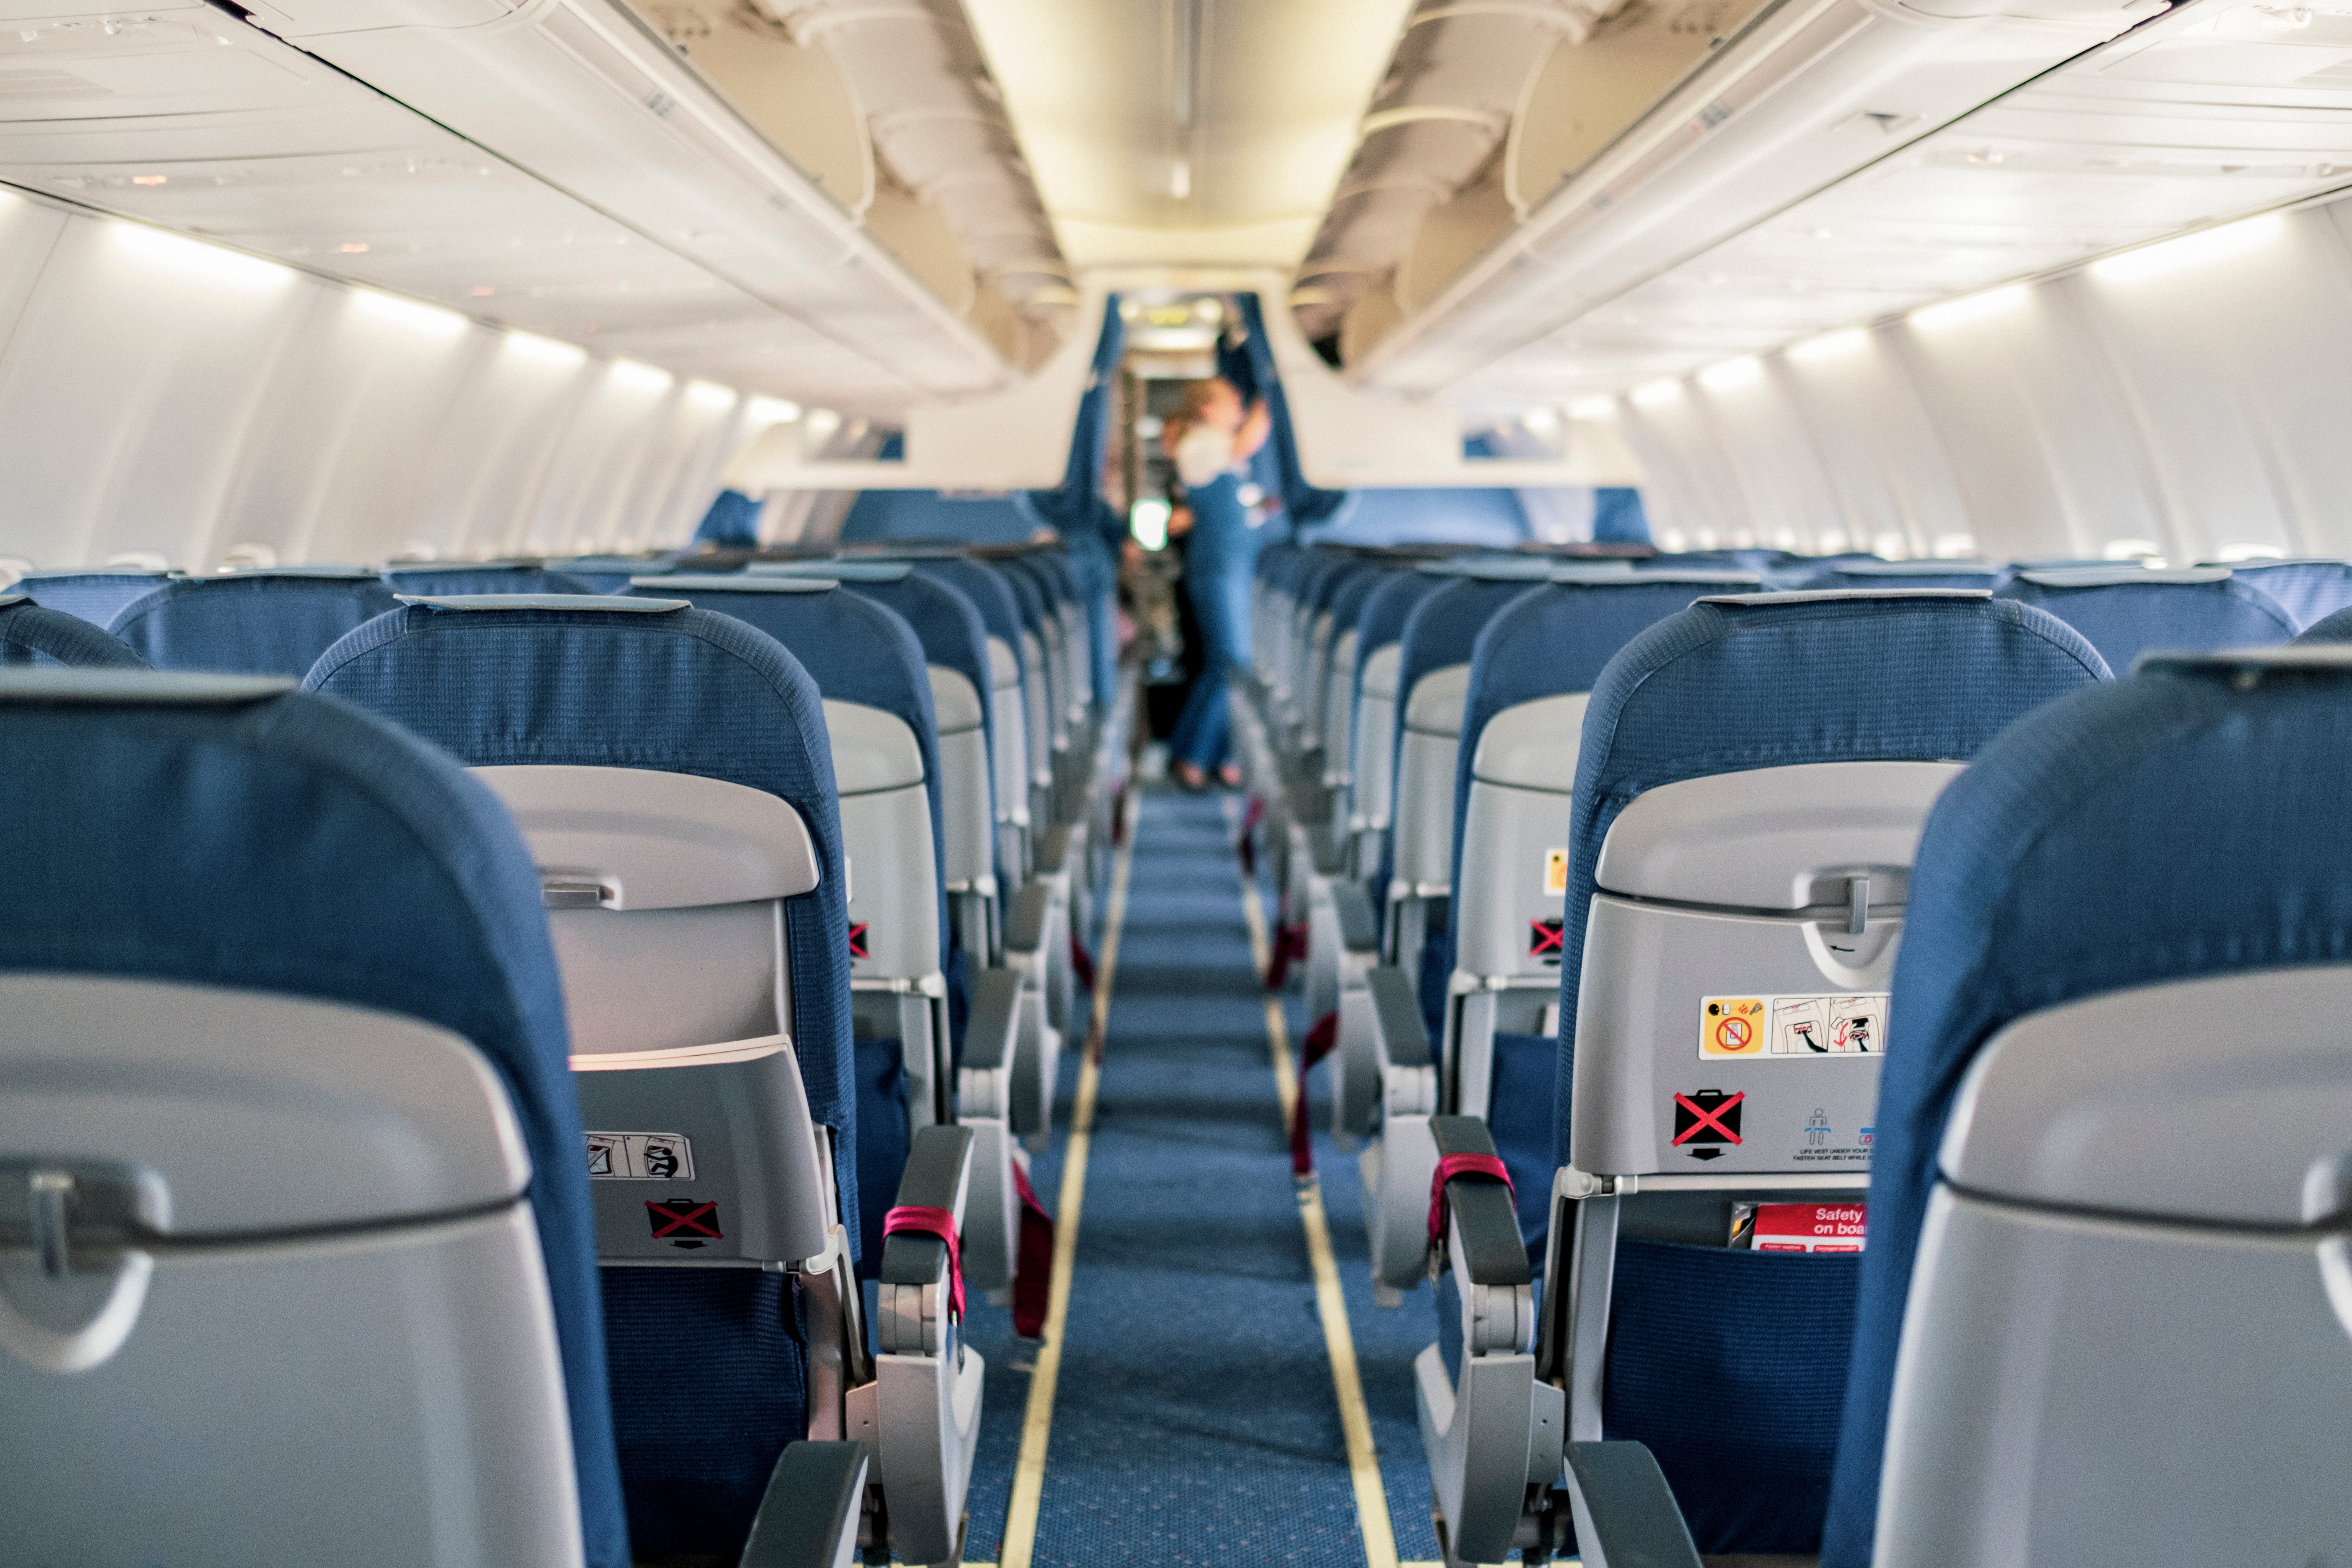 Many airlines charge extra to sit with your travel companions